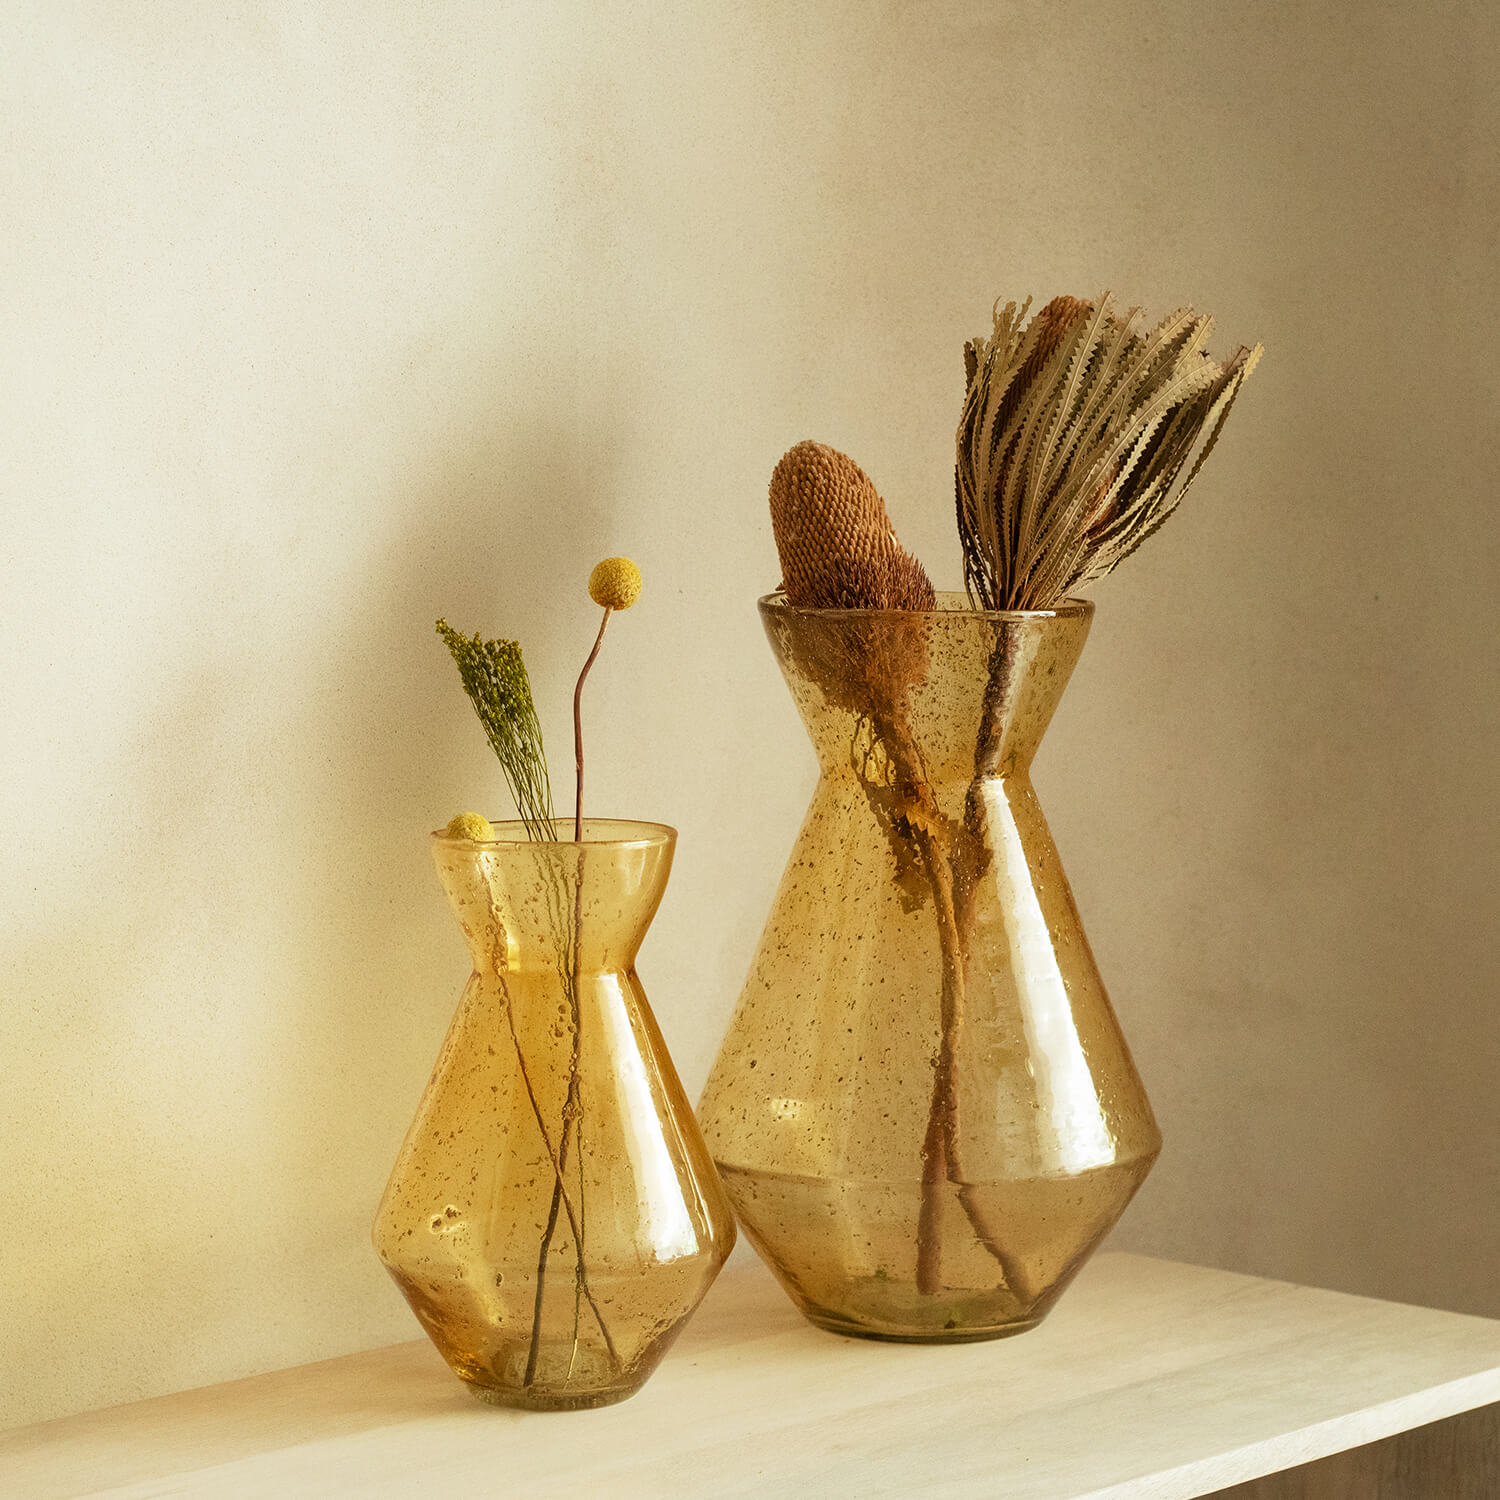 Read more about Graham and green medium speckled yellow glass vase